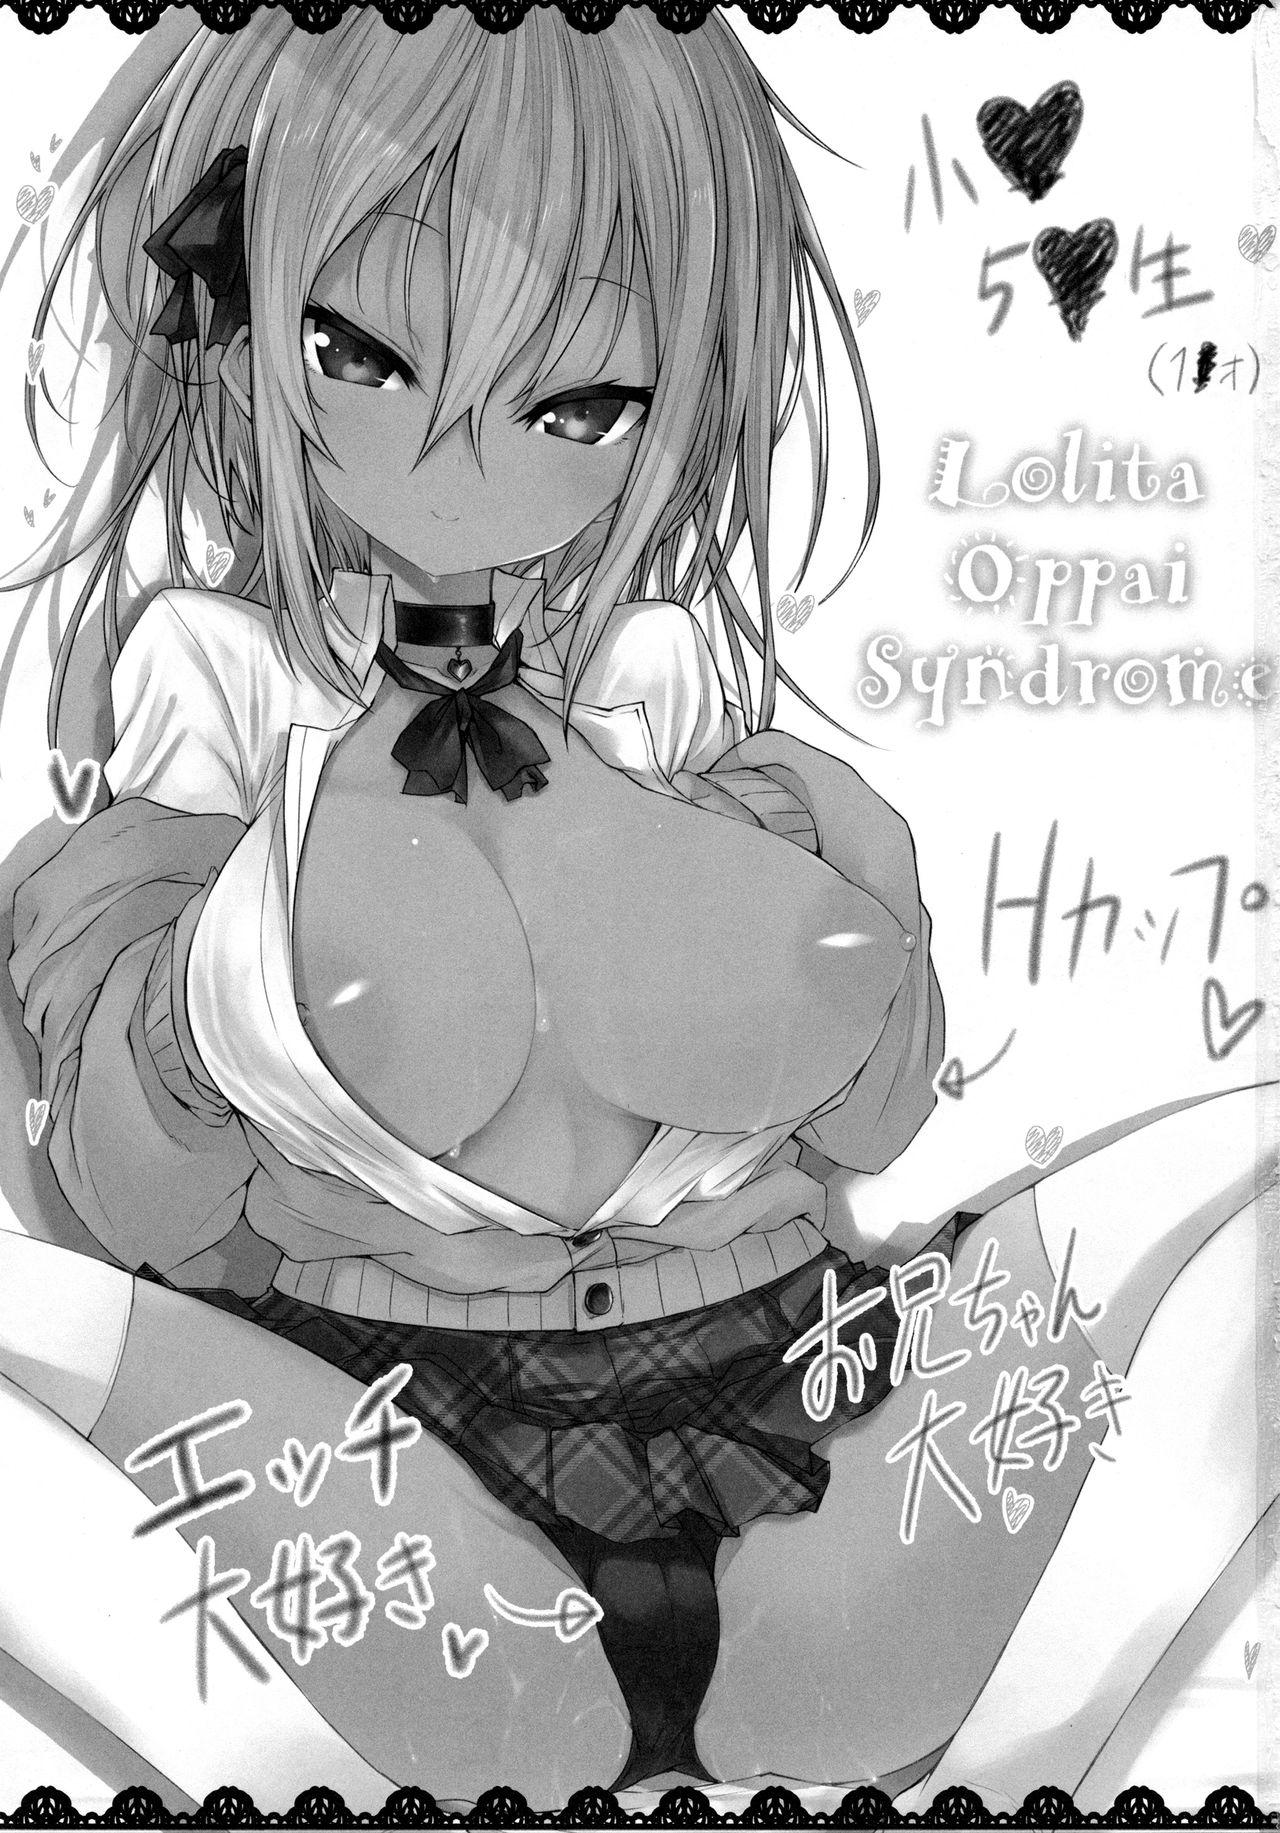 Ngentot Lolita Oppai Syndrome Kink - Page 2